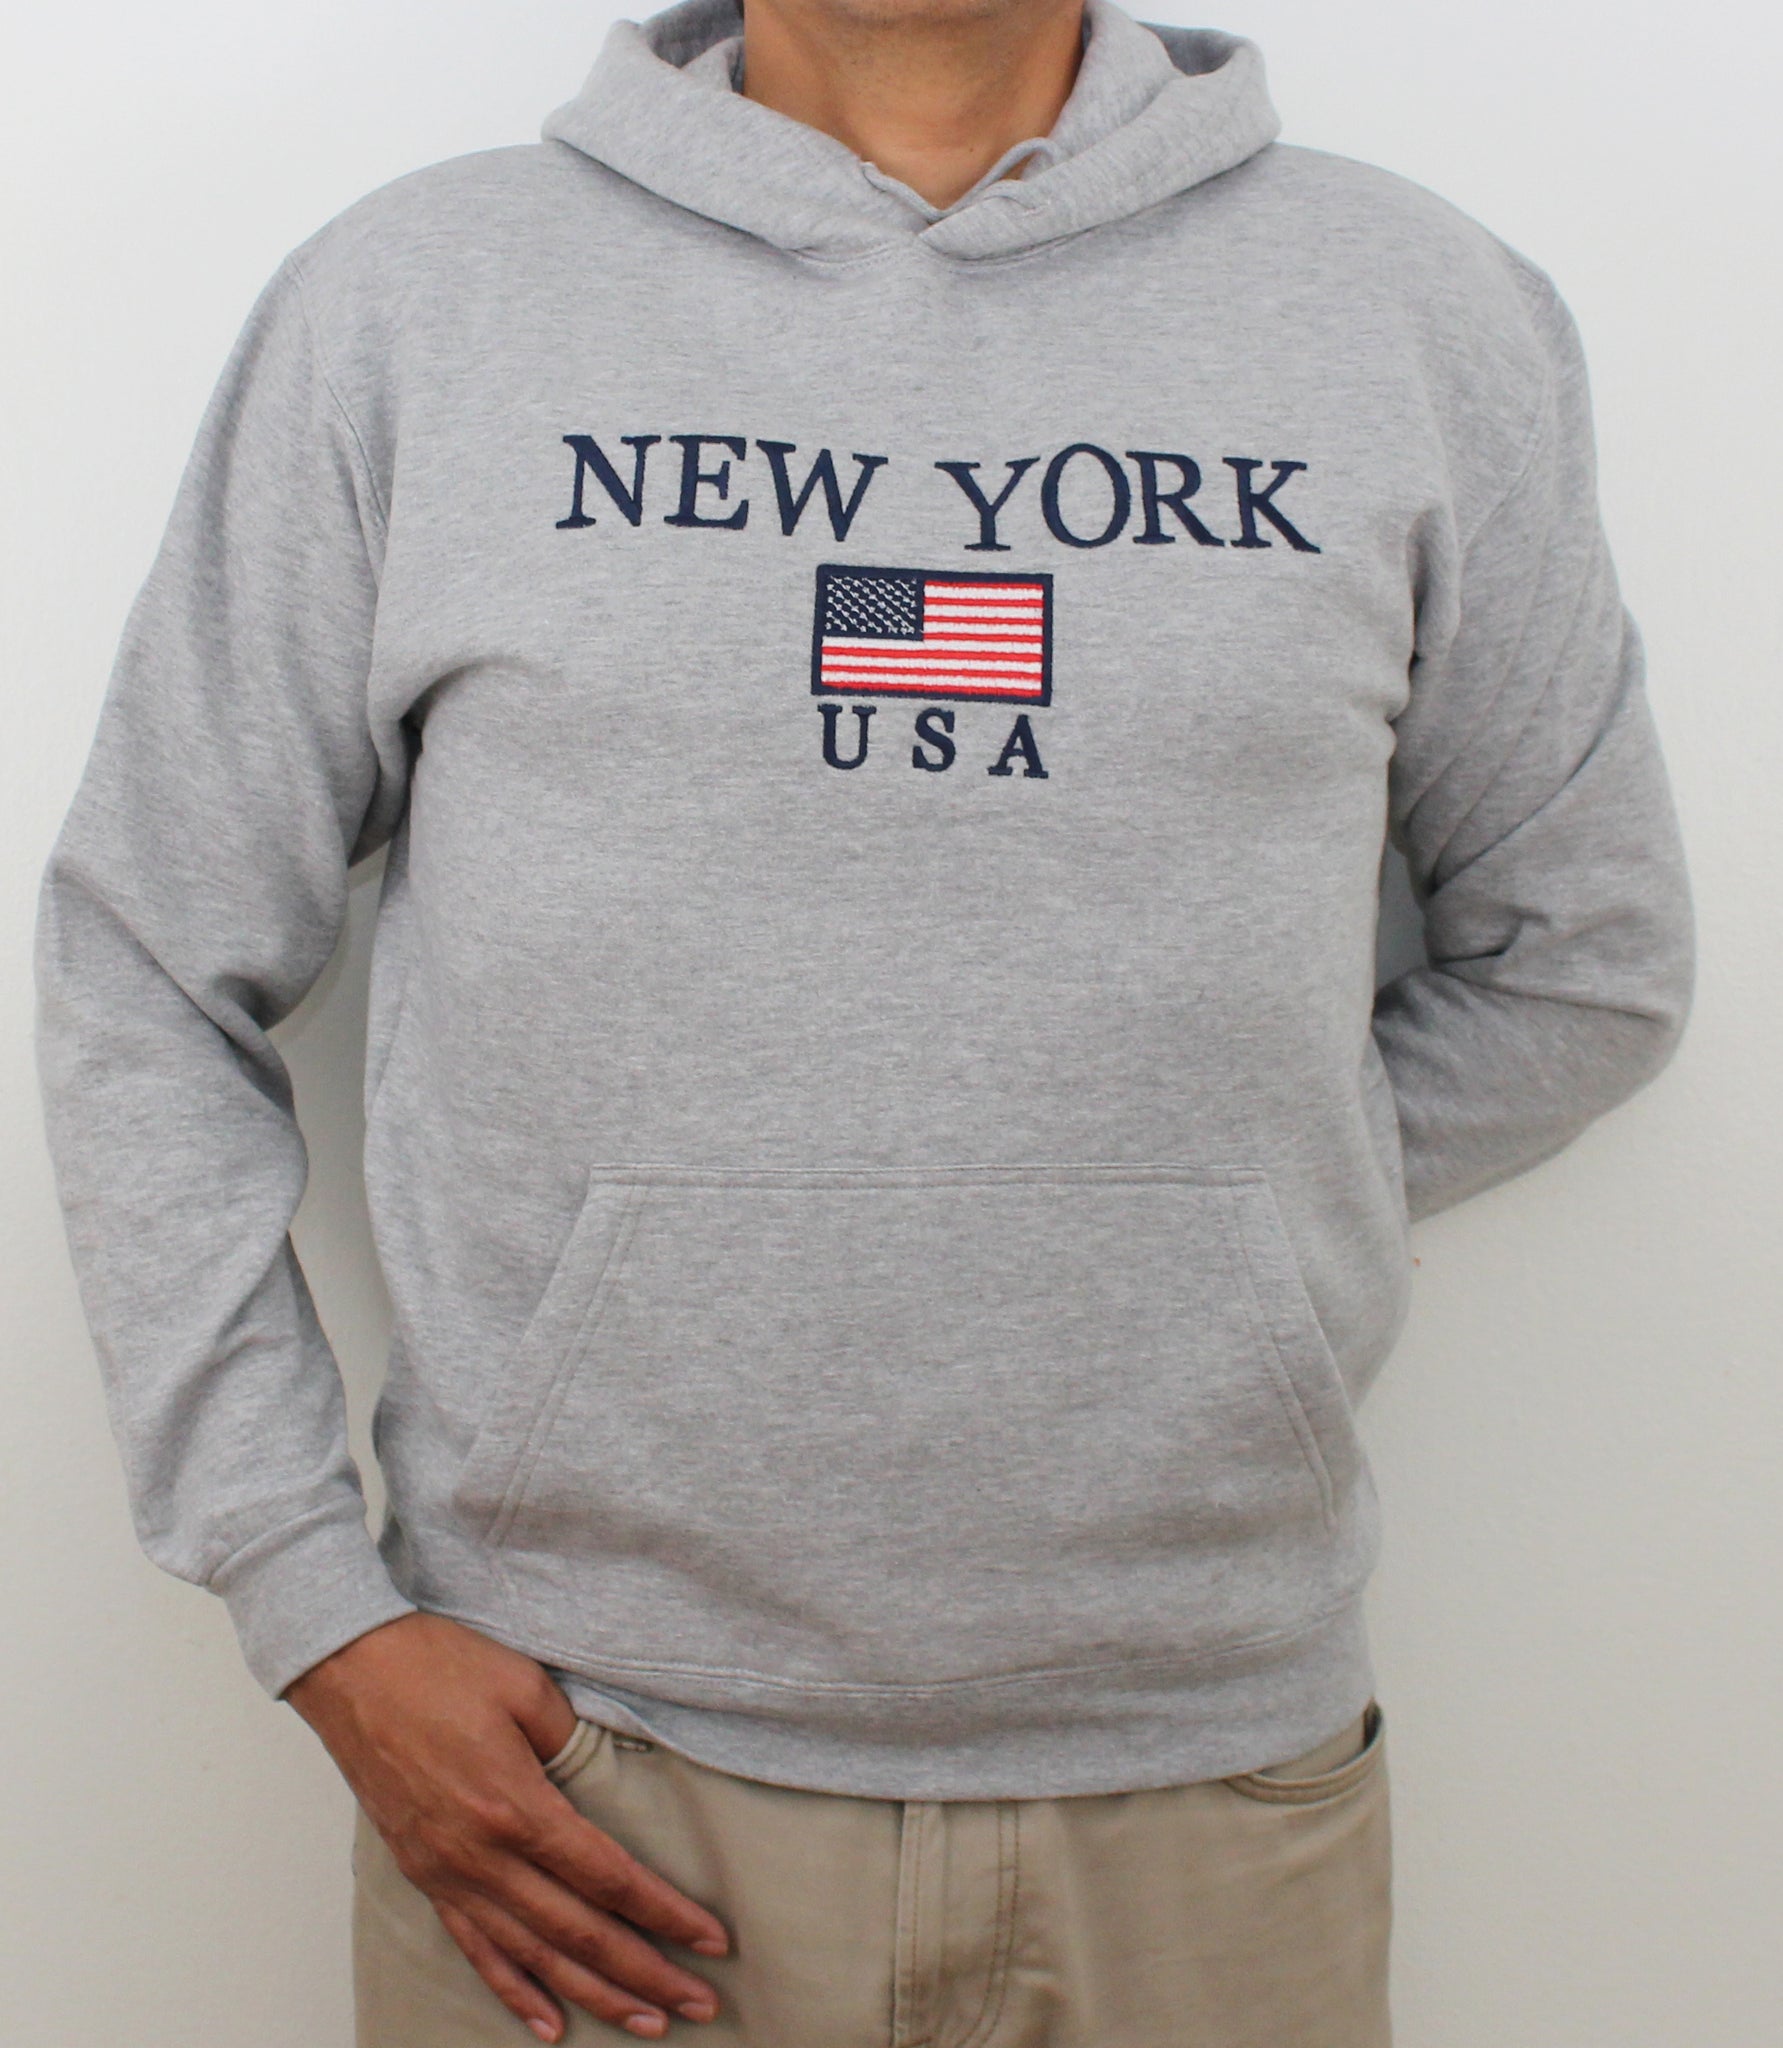 Adult Hoodies Embroidered with 